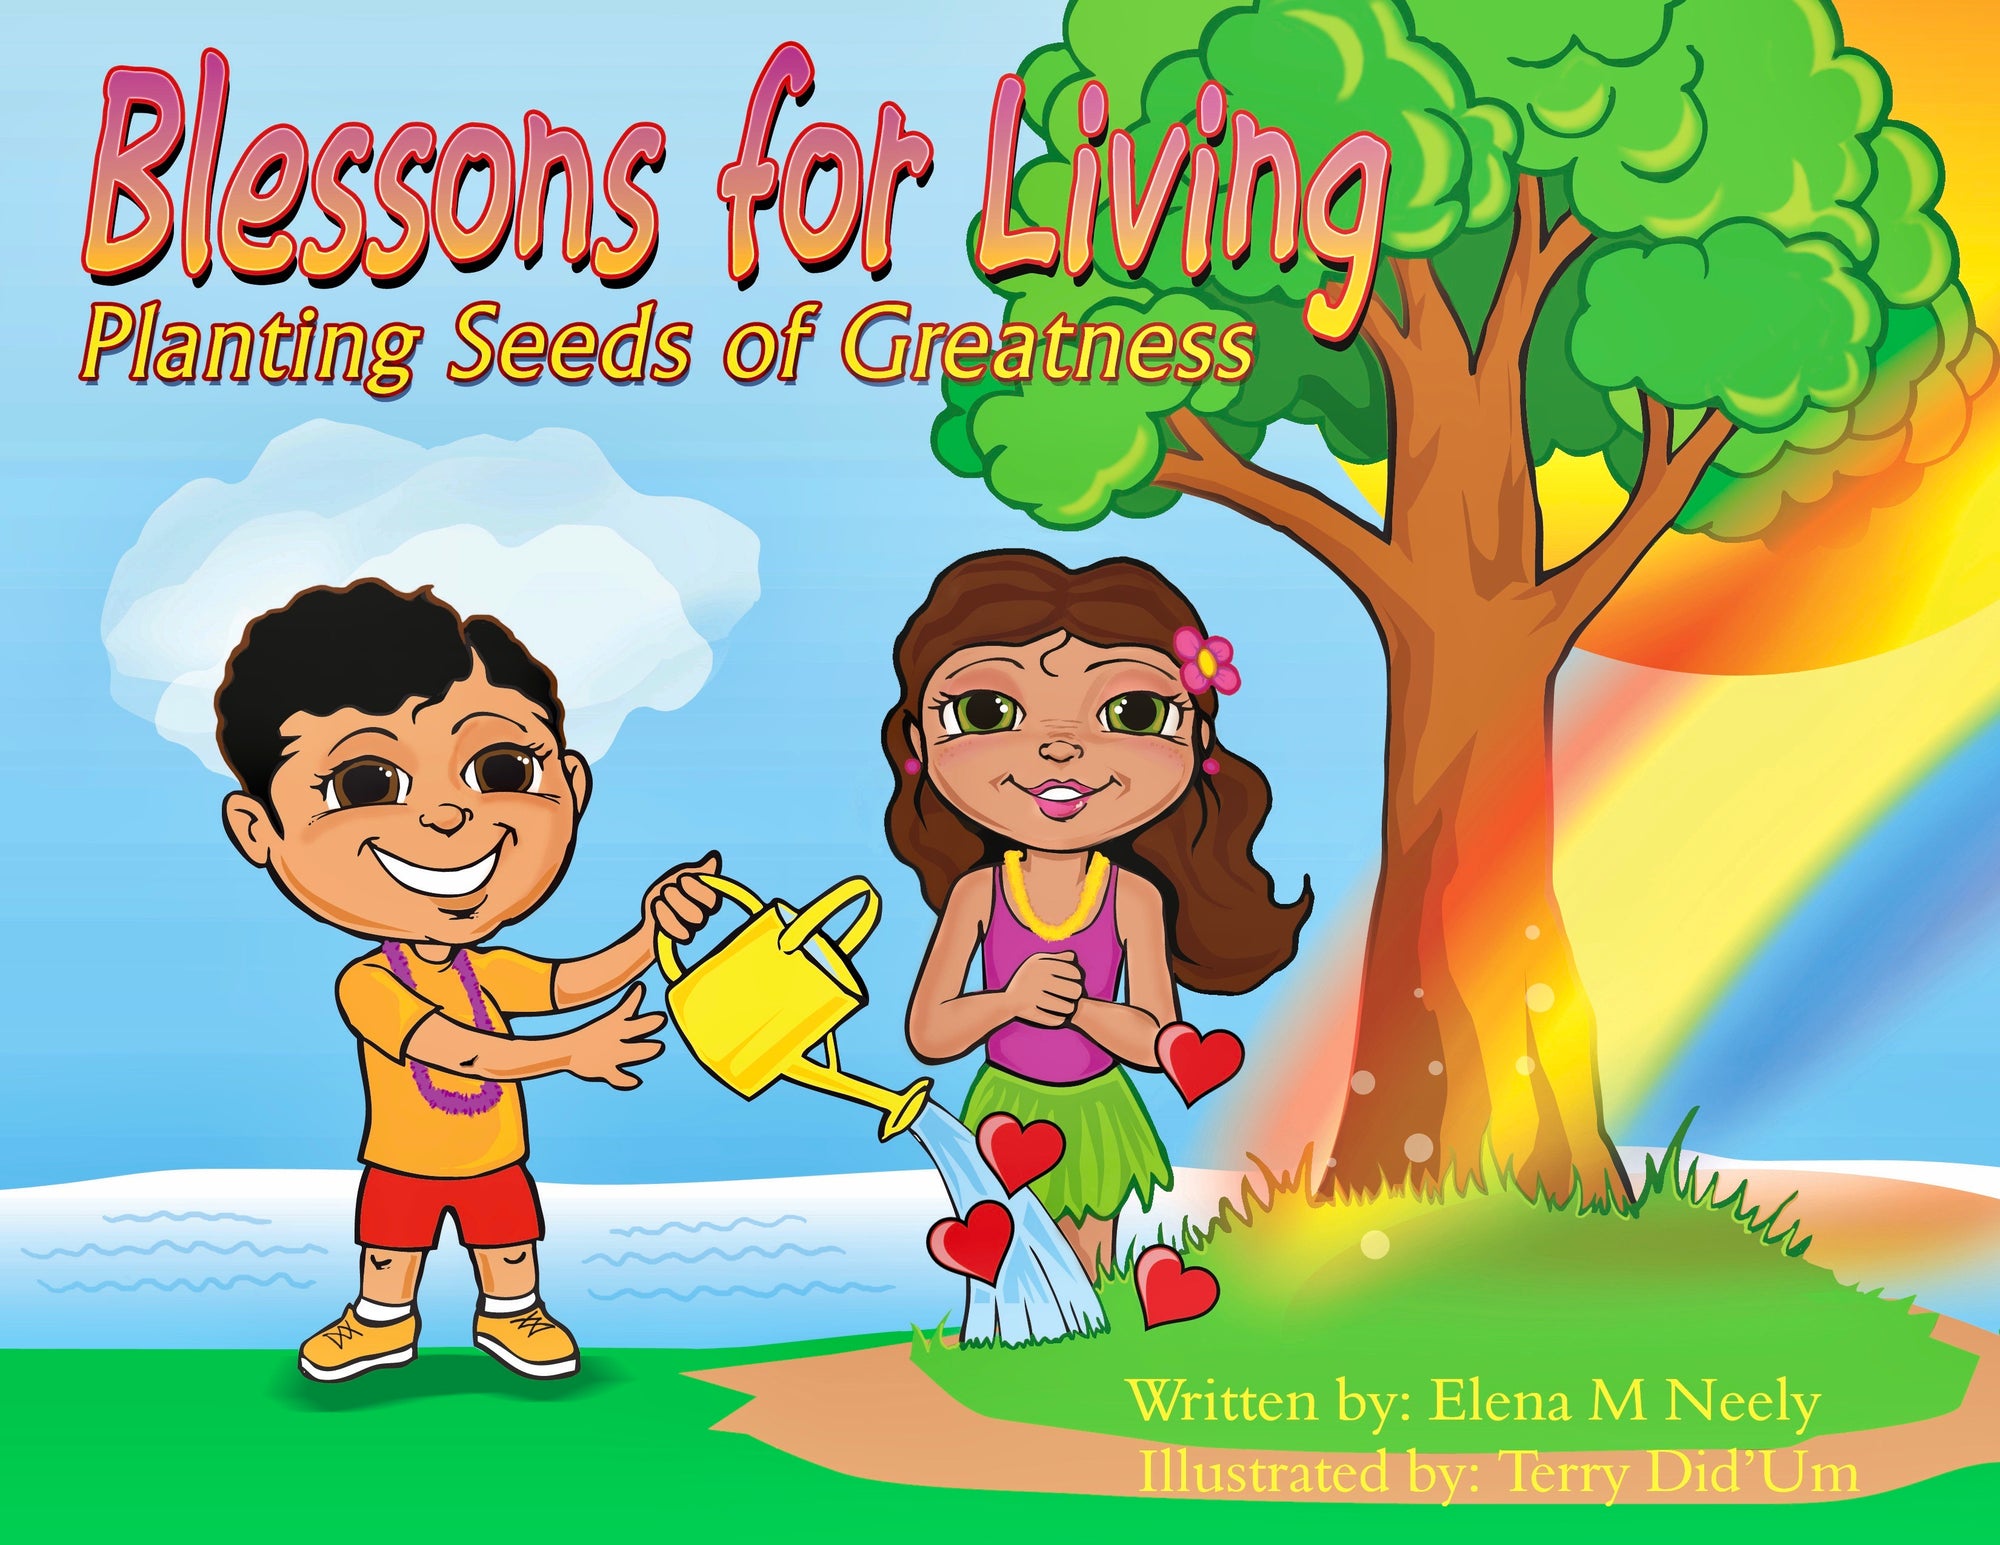 Blesson for Living: Planting Seeds of Greatness